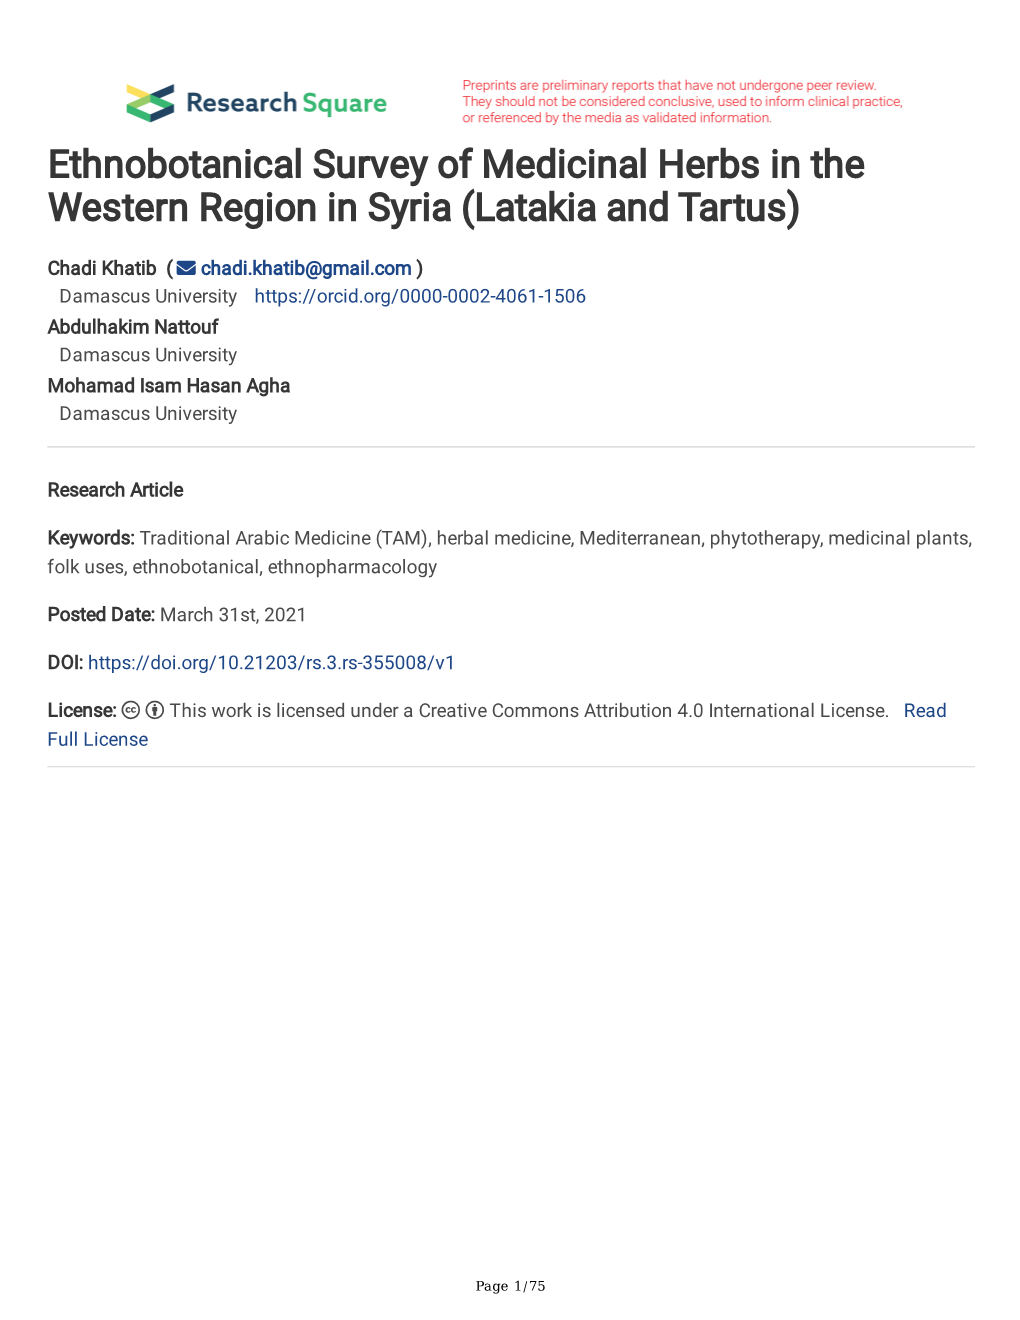 Ethnobotanical Survey of Medicinal Herbs in the Western Region in Syria (Latakia and Tartus)